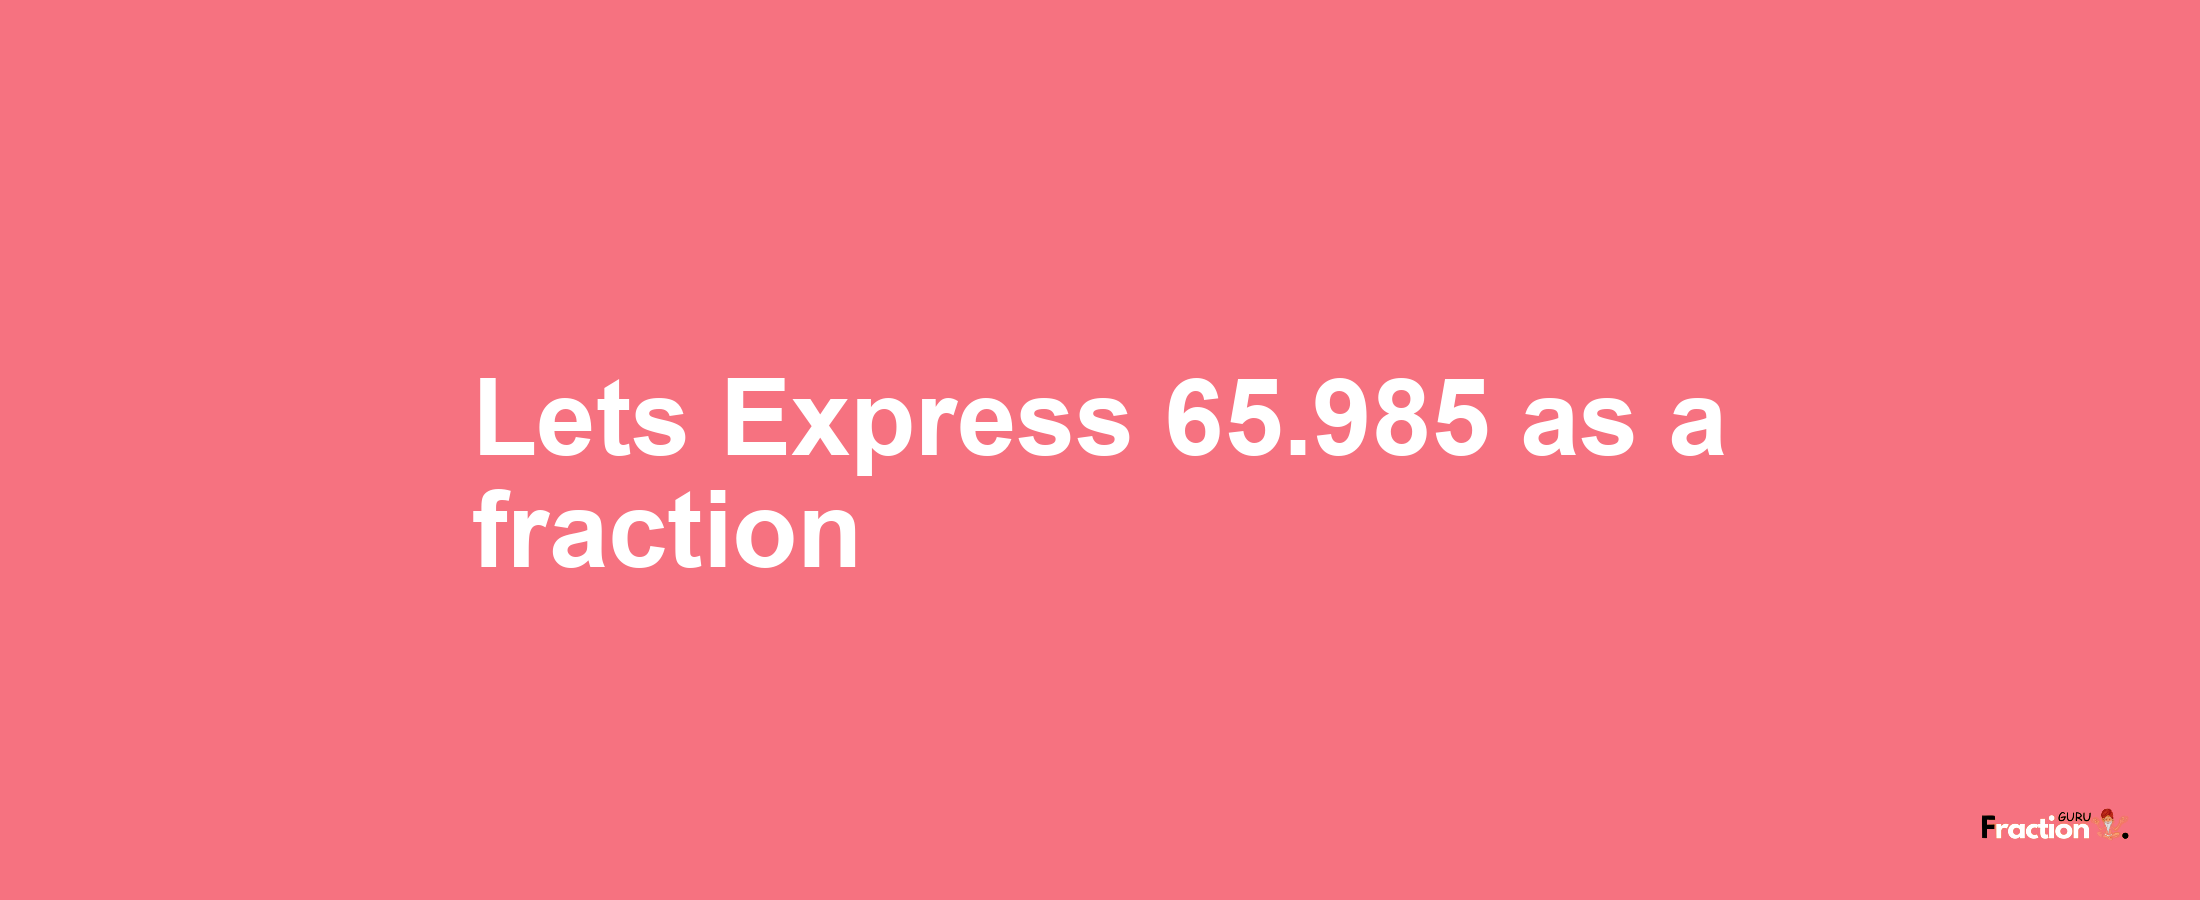 Lets Express 65.985 as afraction